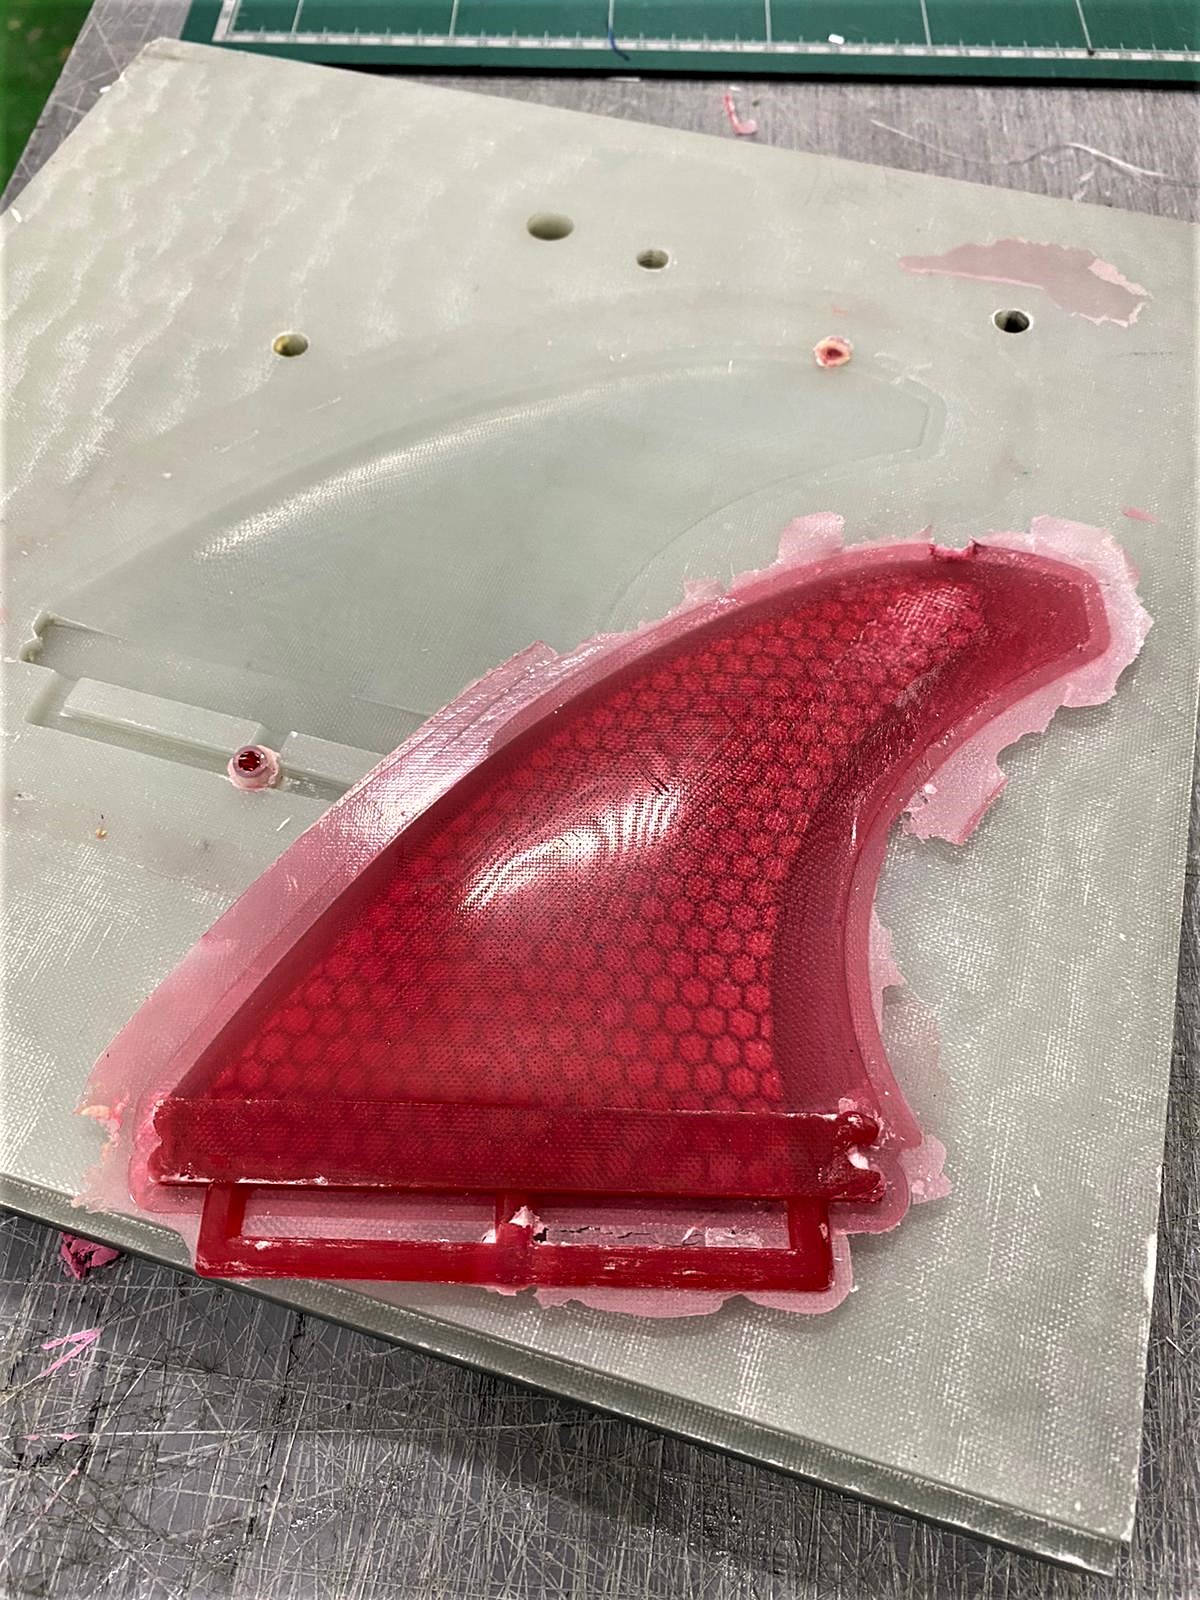 A mold and fin made with recycleable epoxy.